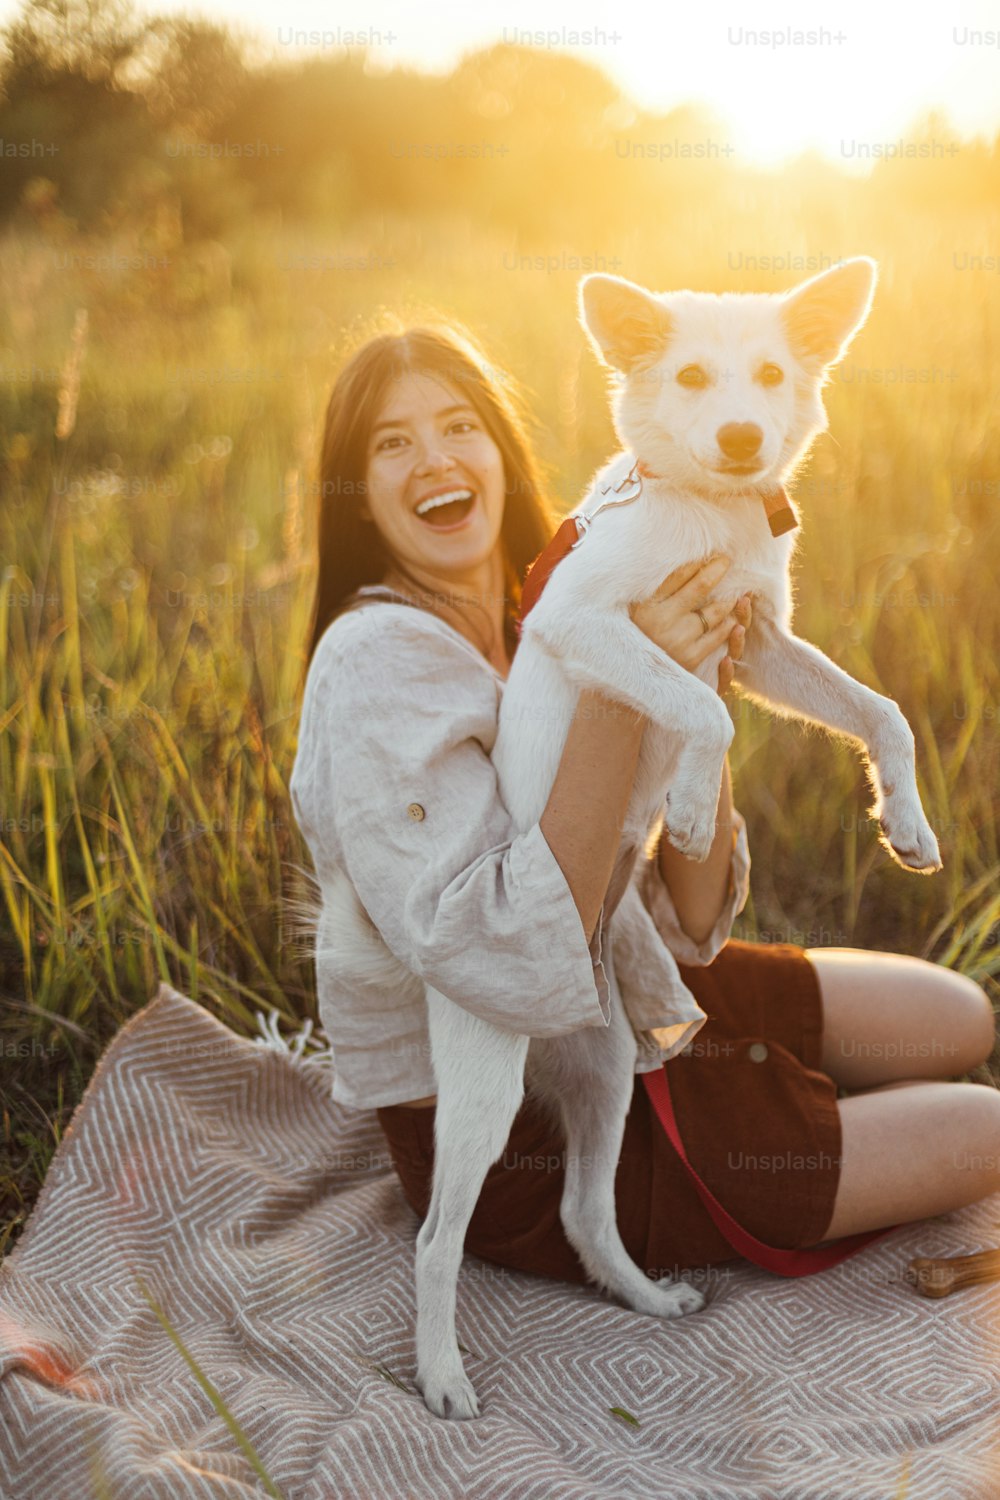 Stylish woman playing with her white dog on blanket in warm sunny light in summer meadow. Summer vacation and picnic with pet. Young boho female having fun with swiss shepherd puppy in sunset